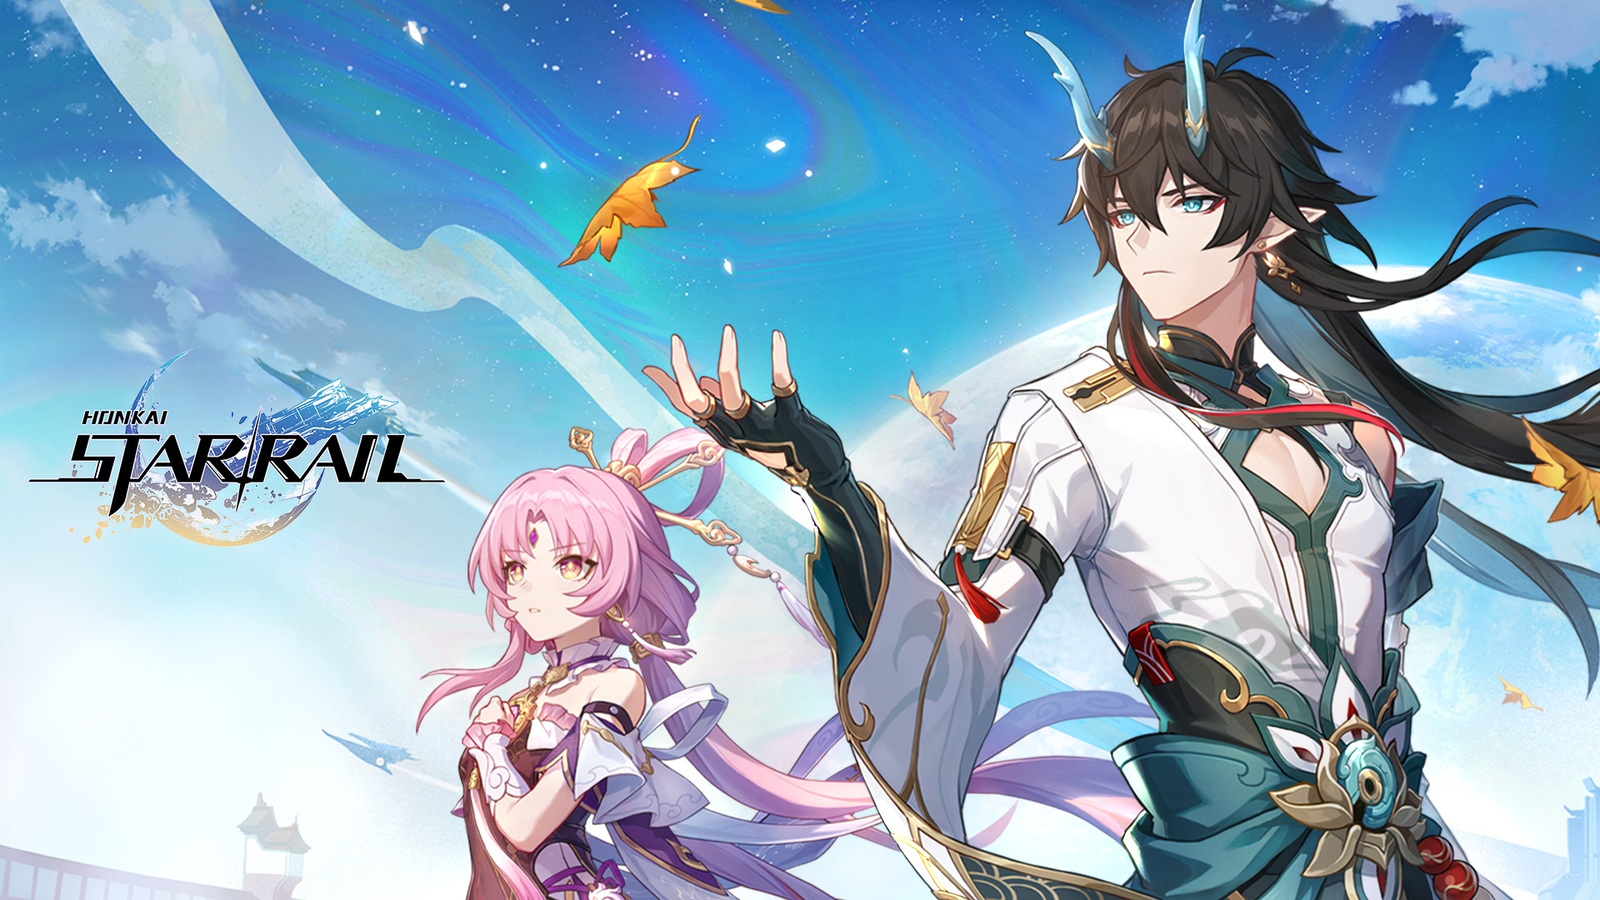 Honkai Star Rail 1.3 overview: Everything in the new Star Rail update